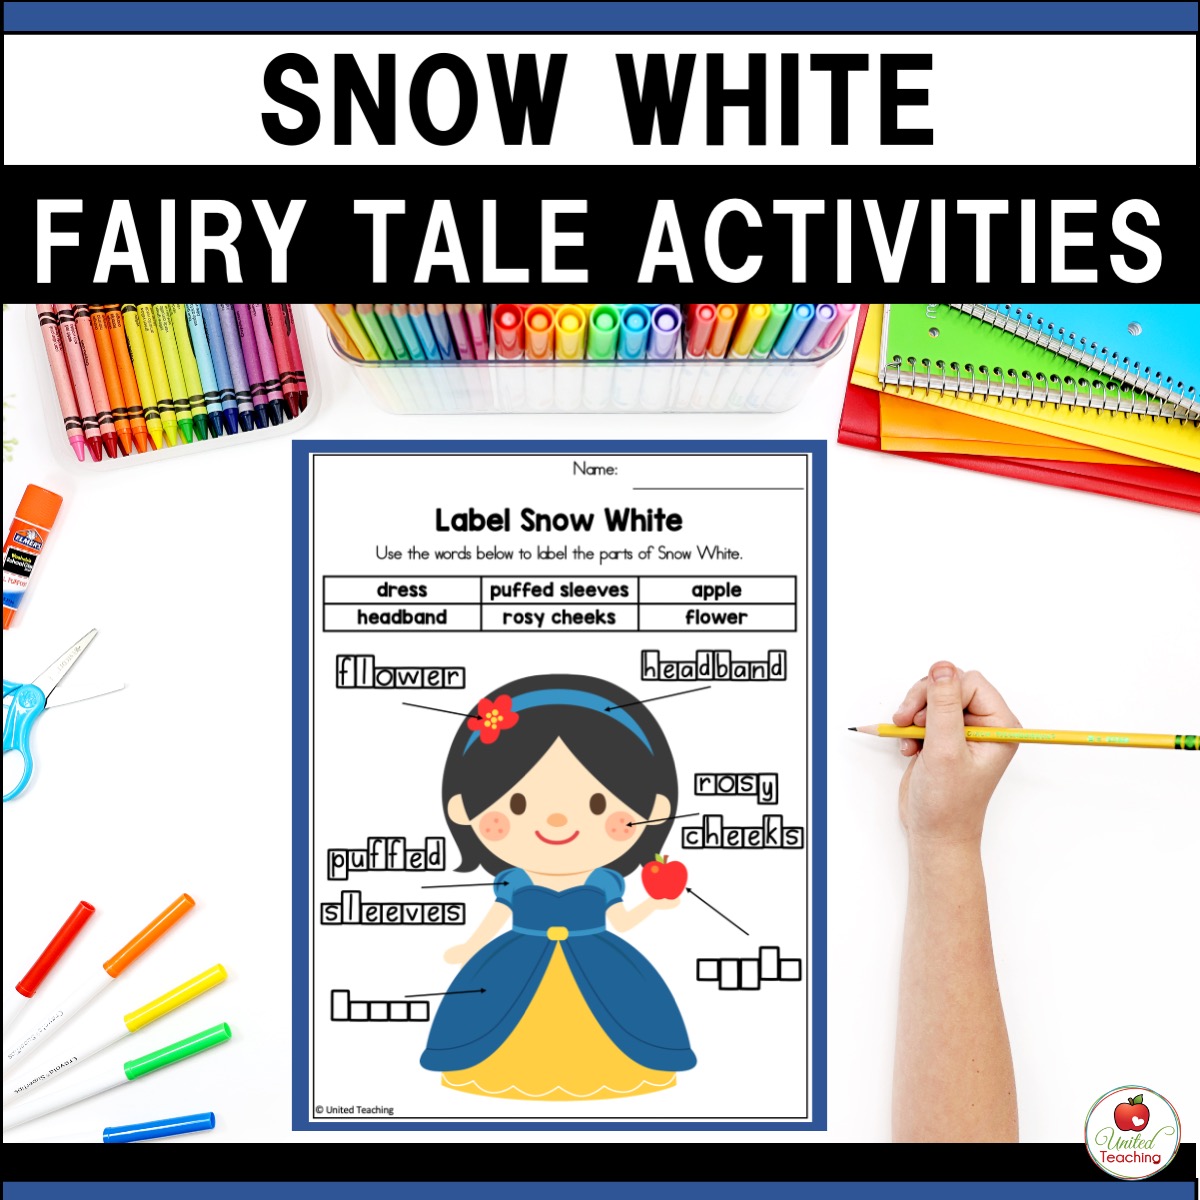 Snow Fort Word Search Puzzle Activity Page with Coloring